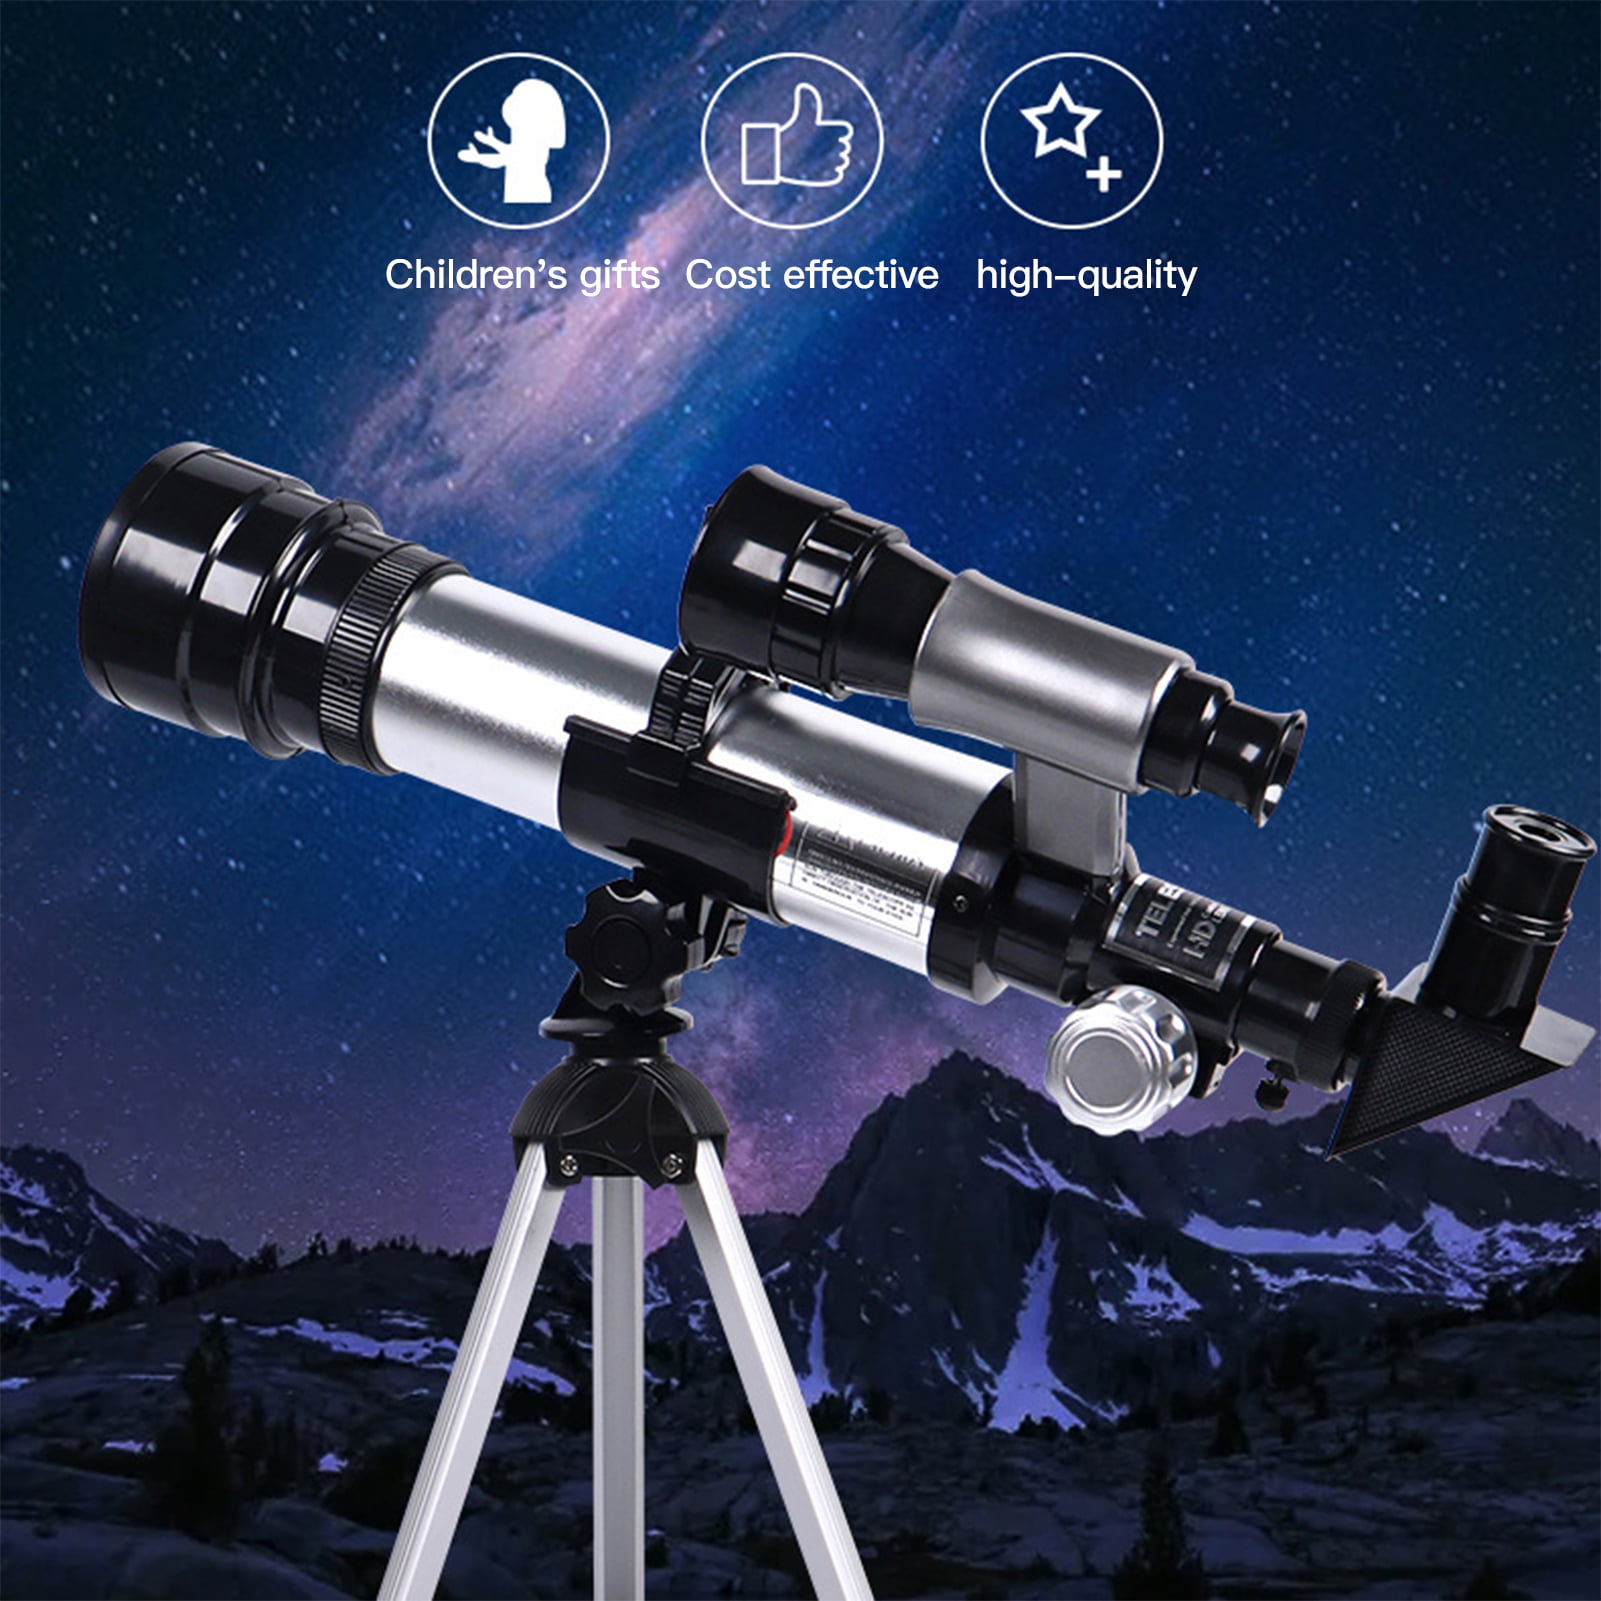 125mm Large Aperture Astronomy Beginners Telescopes Size : Set 1 Best Gift Telescope 35X-350X High Magnification Refractor Telescope 29.5~47in for Beginner,Adult and Kids Adjustable Tripod 